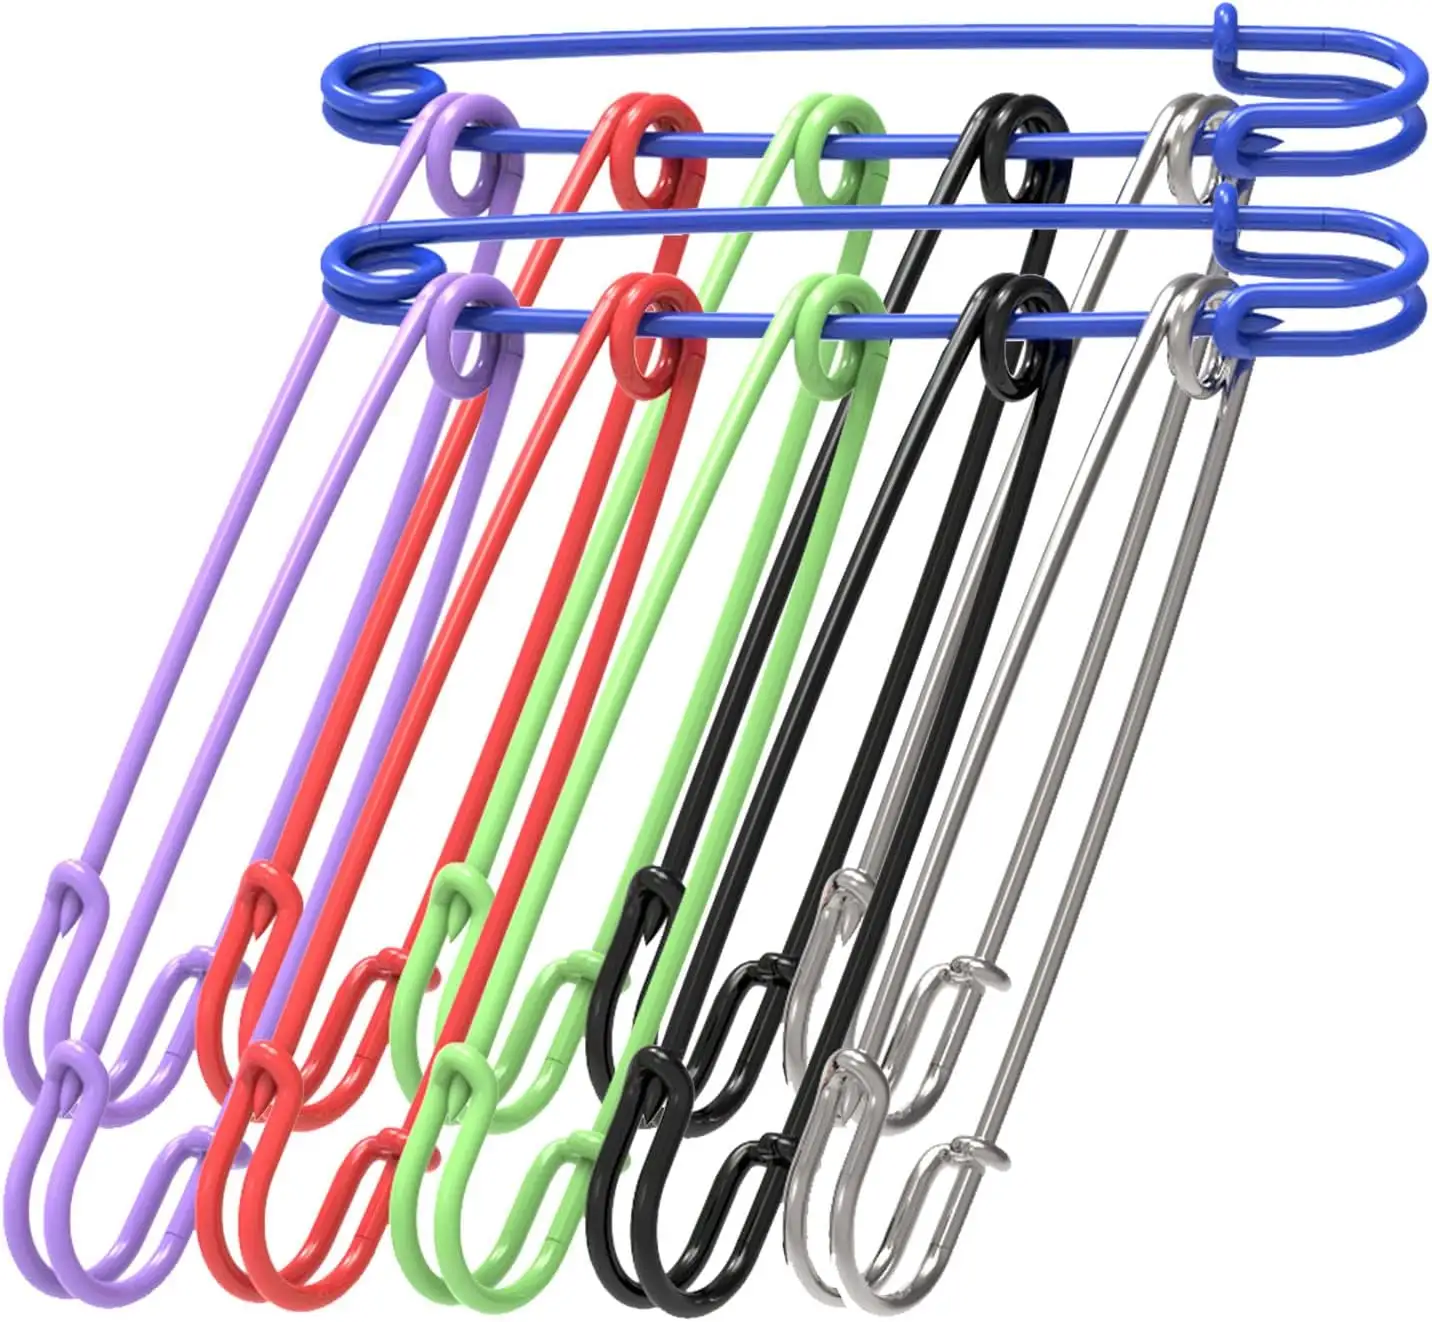 Assorted Color Extra Large Heavy Duty Stainless Steel Safety Pins for Blankets Skirts Kilts Knitted Fabric Crafts